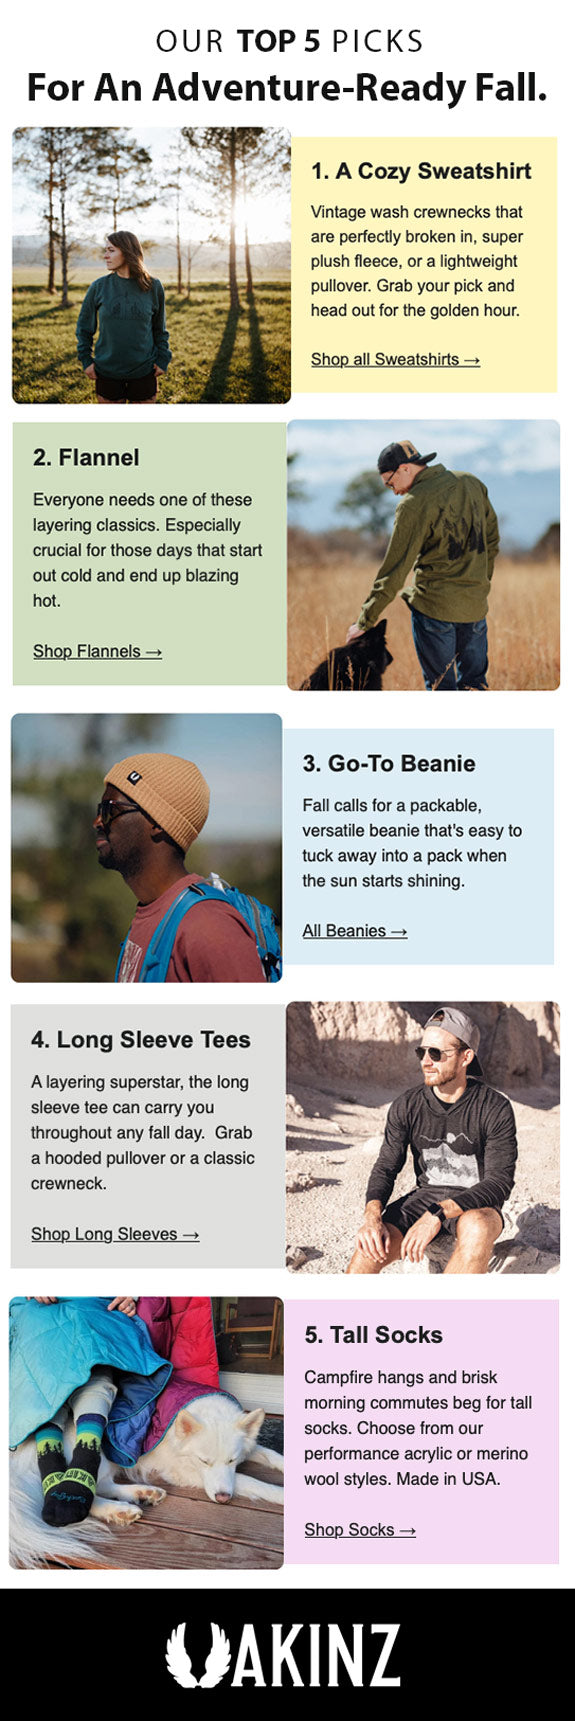 top 5 clothing picks for an adventure ready fall